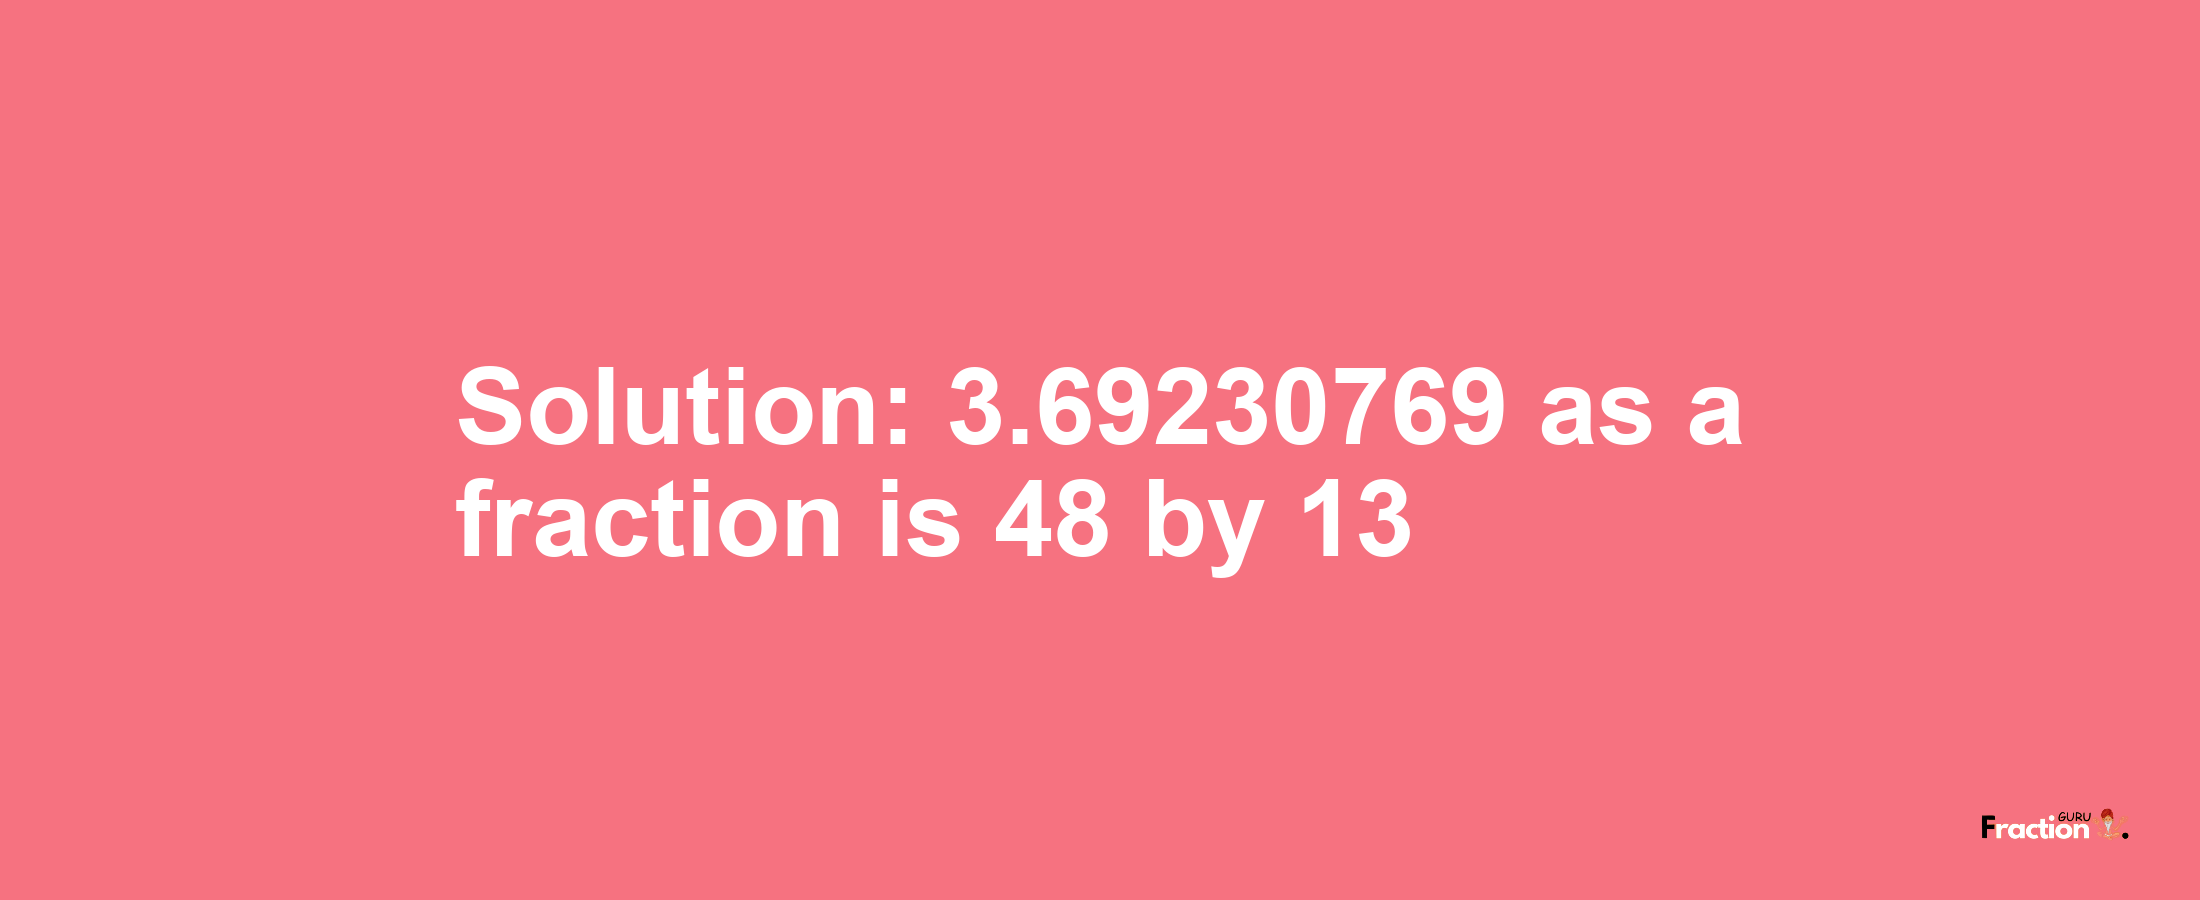 Solution:3.69230769 as a fraction is 48/13